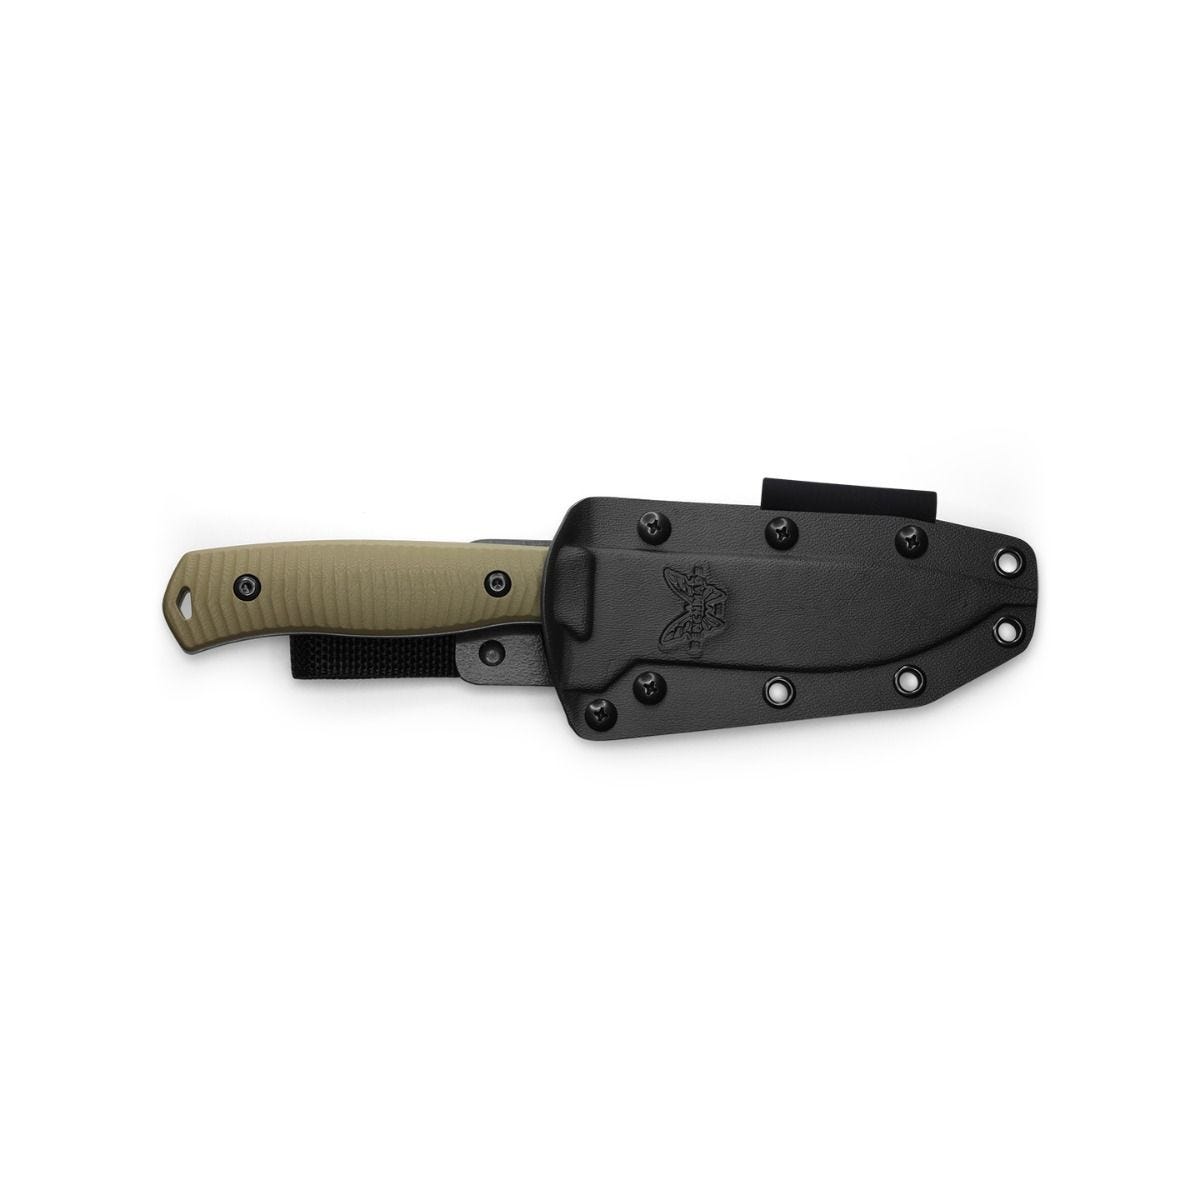 Benchmade Anonimus Knife-KNIFE-PLAIN-DROP-POINT-Kevin's Fine Outdoor Gear & Apparel